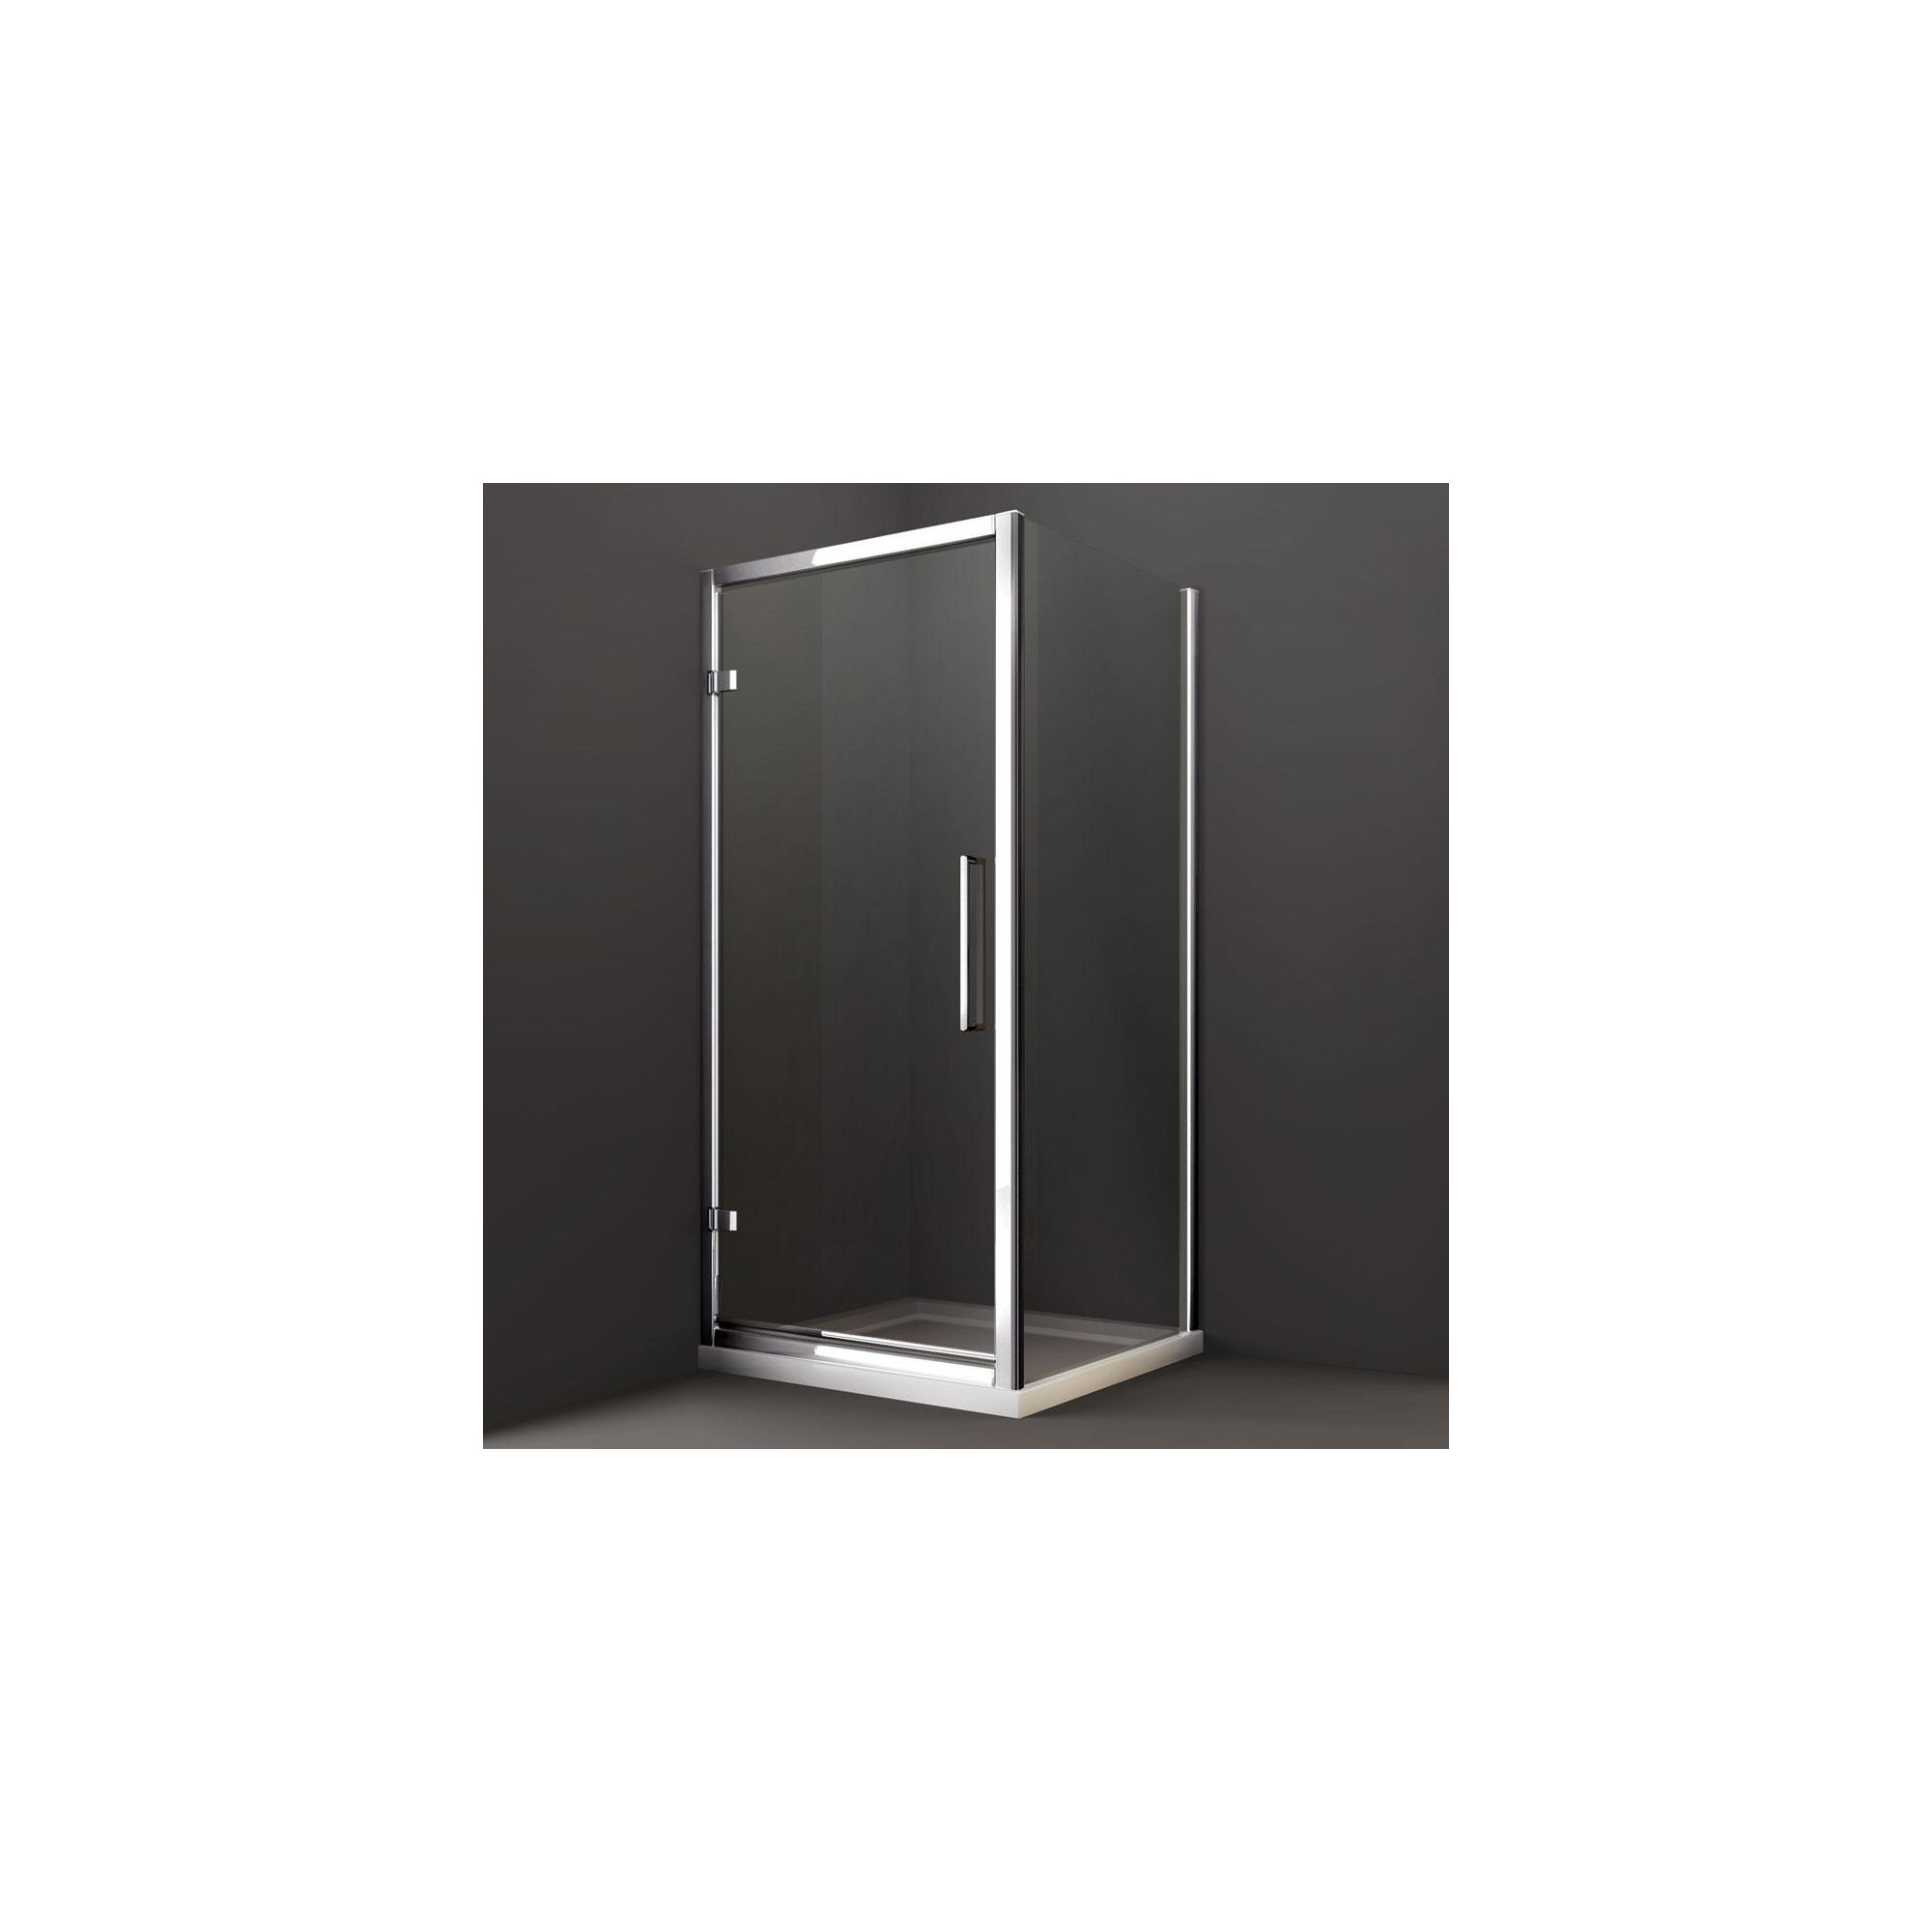 Merlyn Series 8 Hinged Shower Door, 900mm Wide, Chrome Frame, 8mm Glass at Tescos Direct